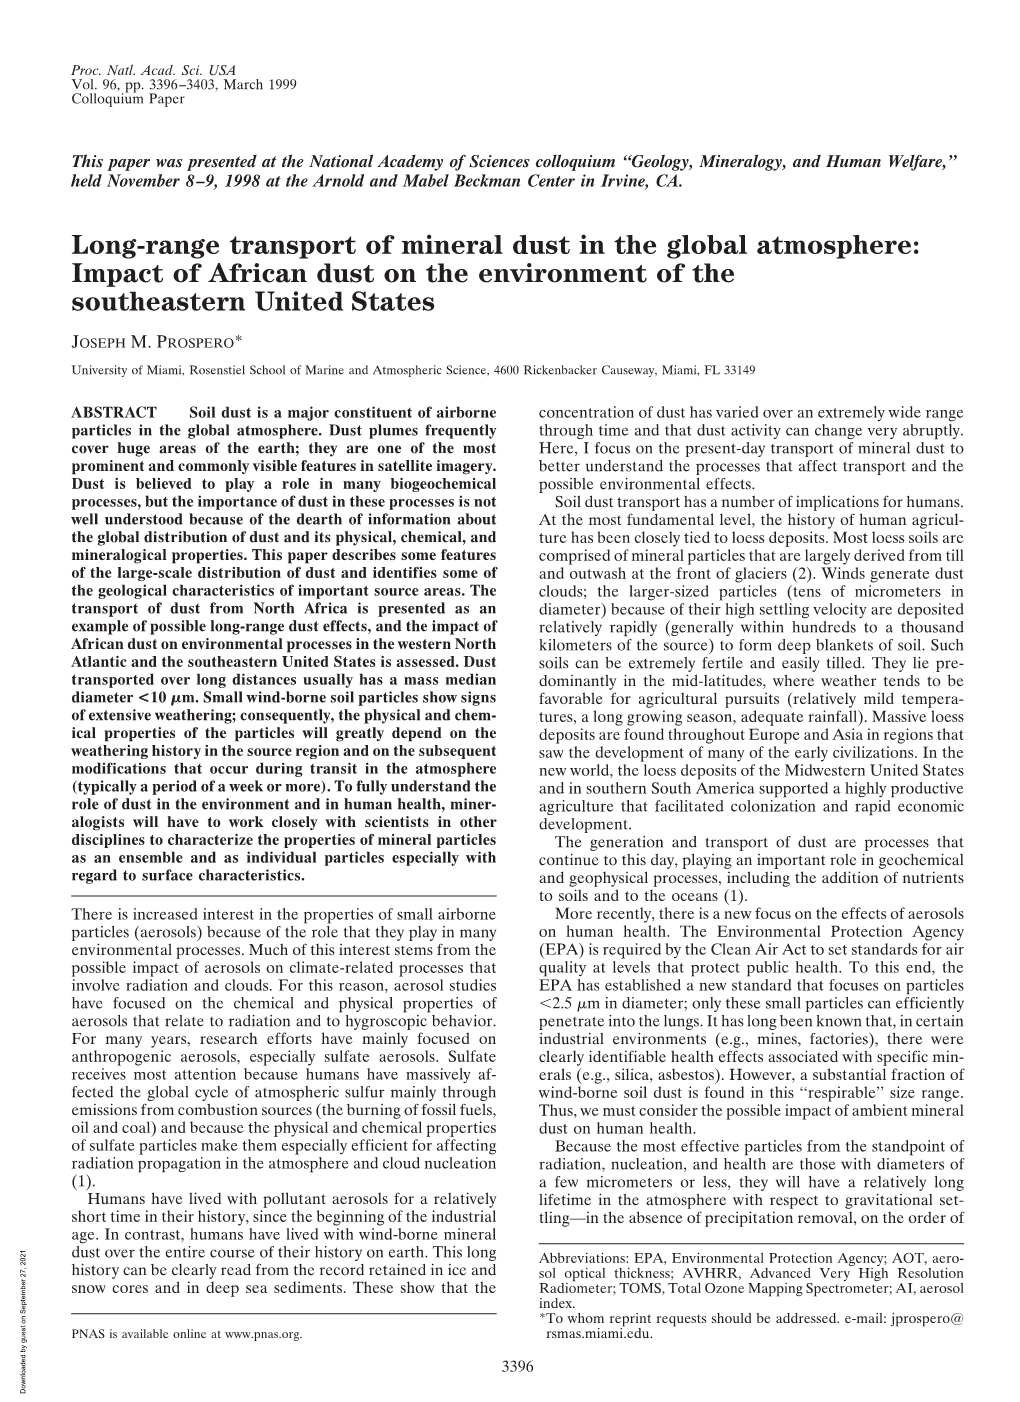 Long-Range Transport of Mineral Dust in the Global Atmosphere: Impact of African Dust on the Environment of the Southeastern United States